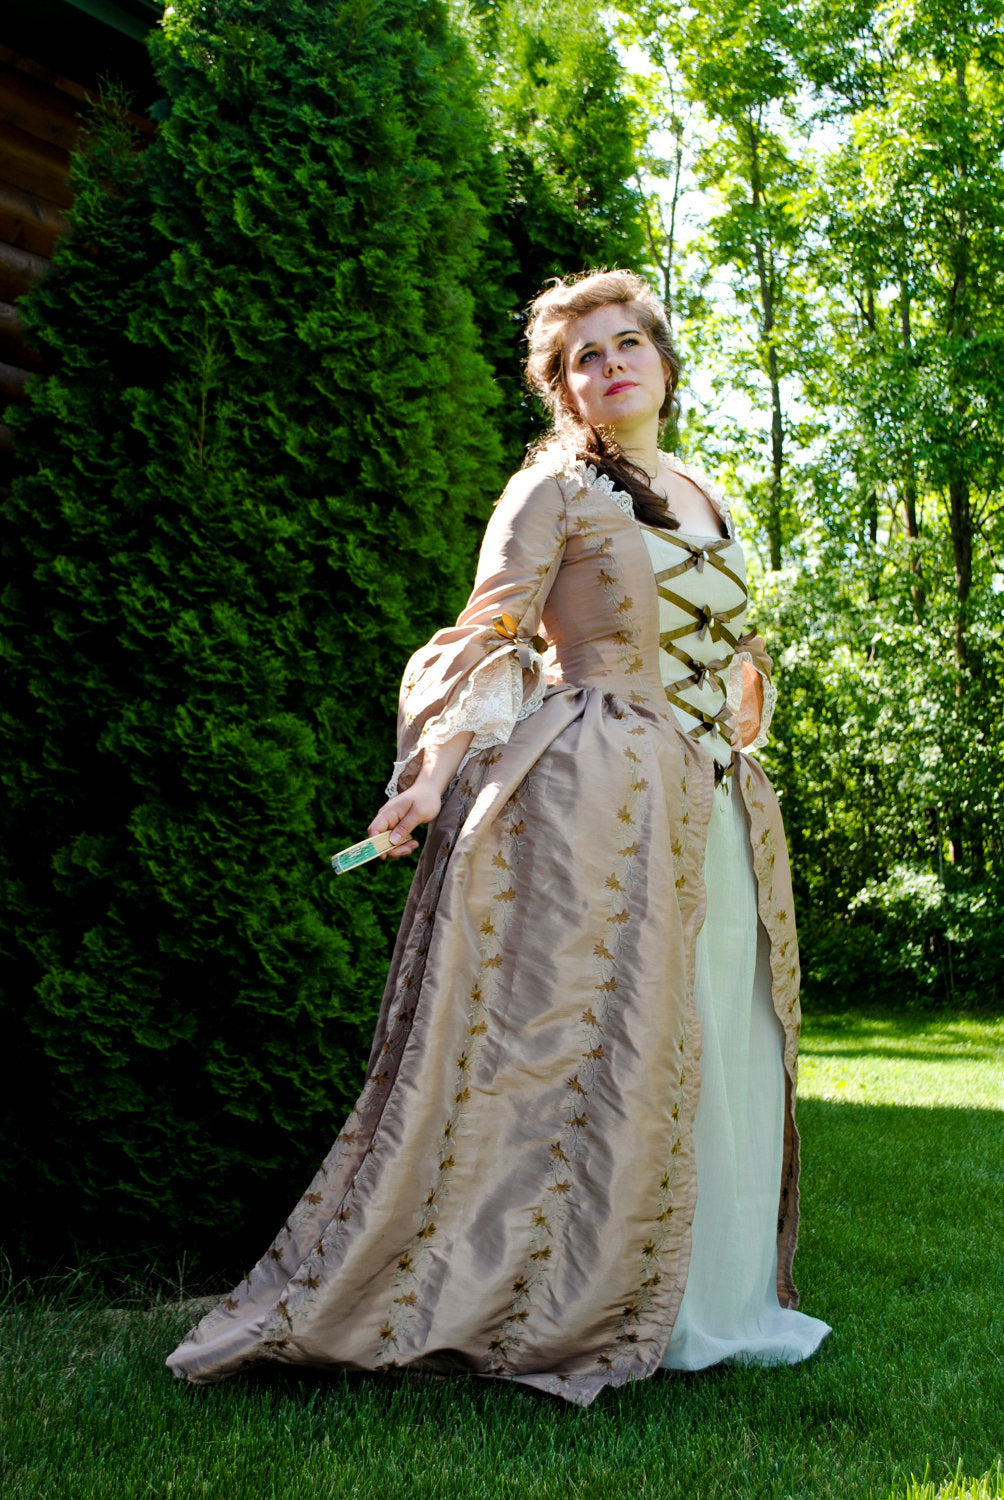 CUSTOM Colonial 18th Century Rococo Dress Gown 1700s outfit embroidered taffeta